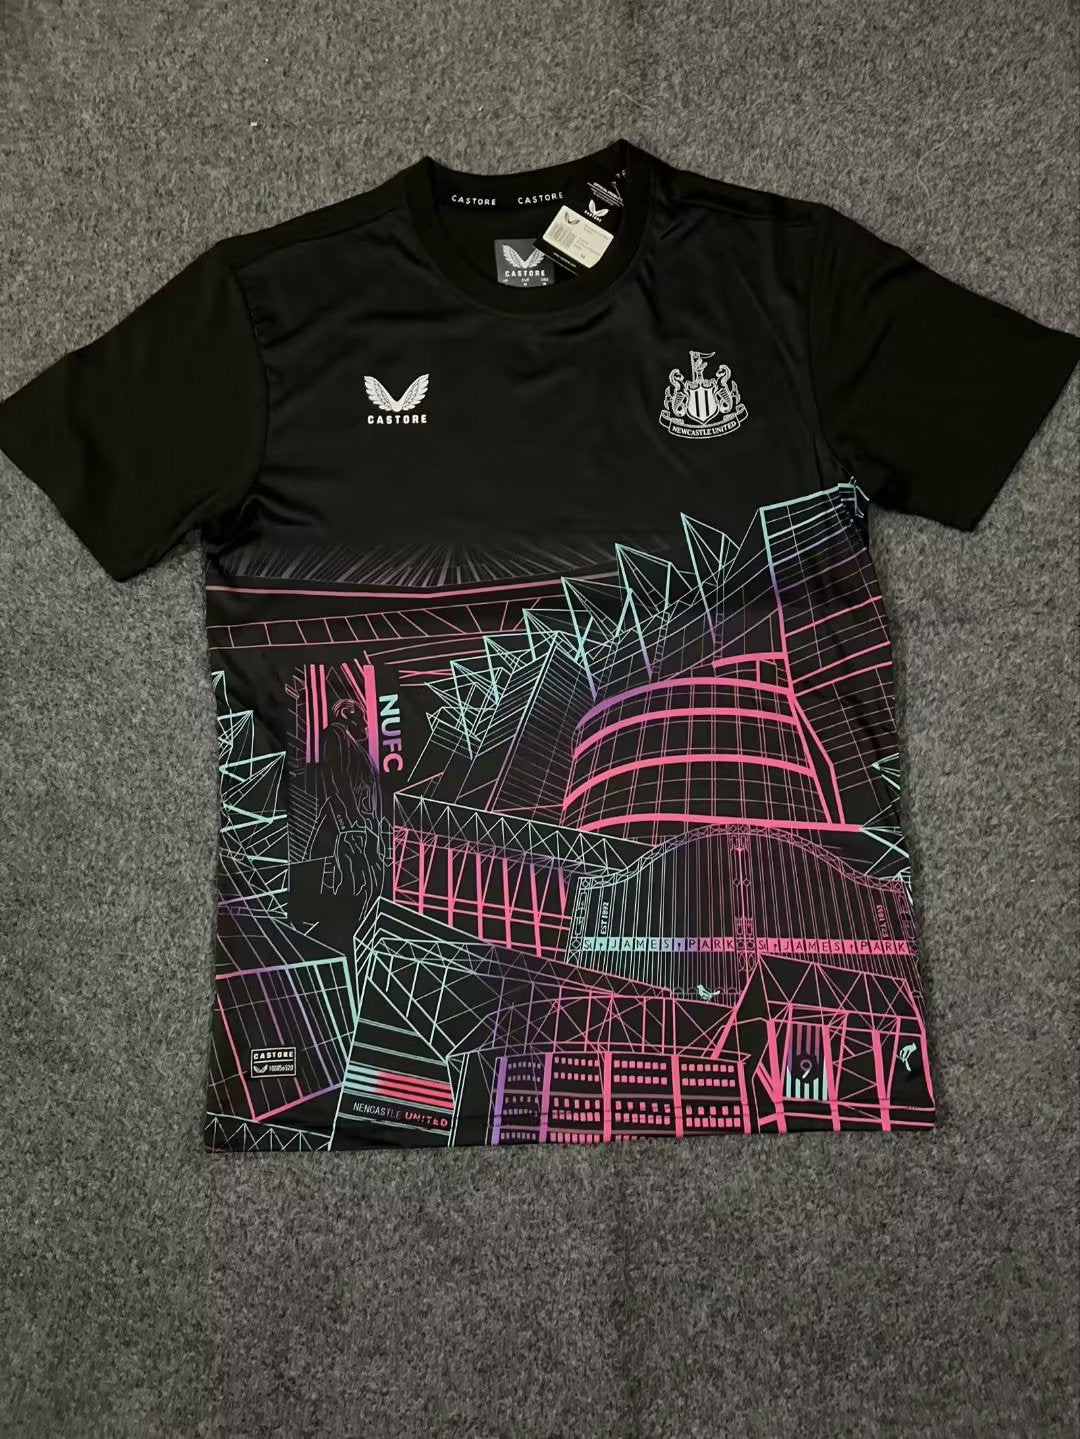 Newcastle United Special Edition Shirt